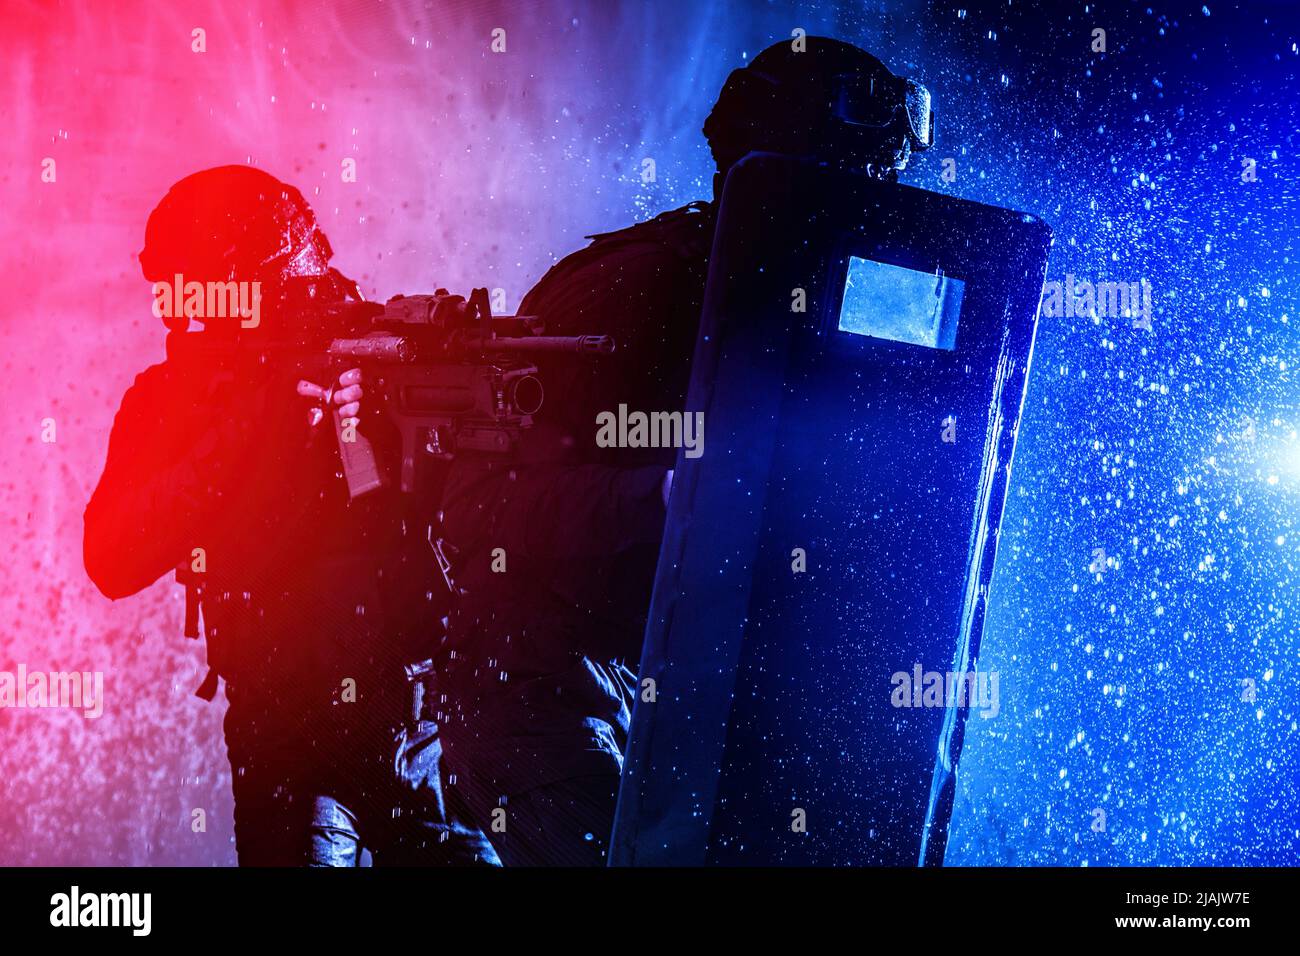 SWAT team officers protecting themselves behind ballistic shield as they move through a firefight. Stock Photo